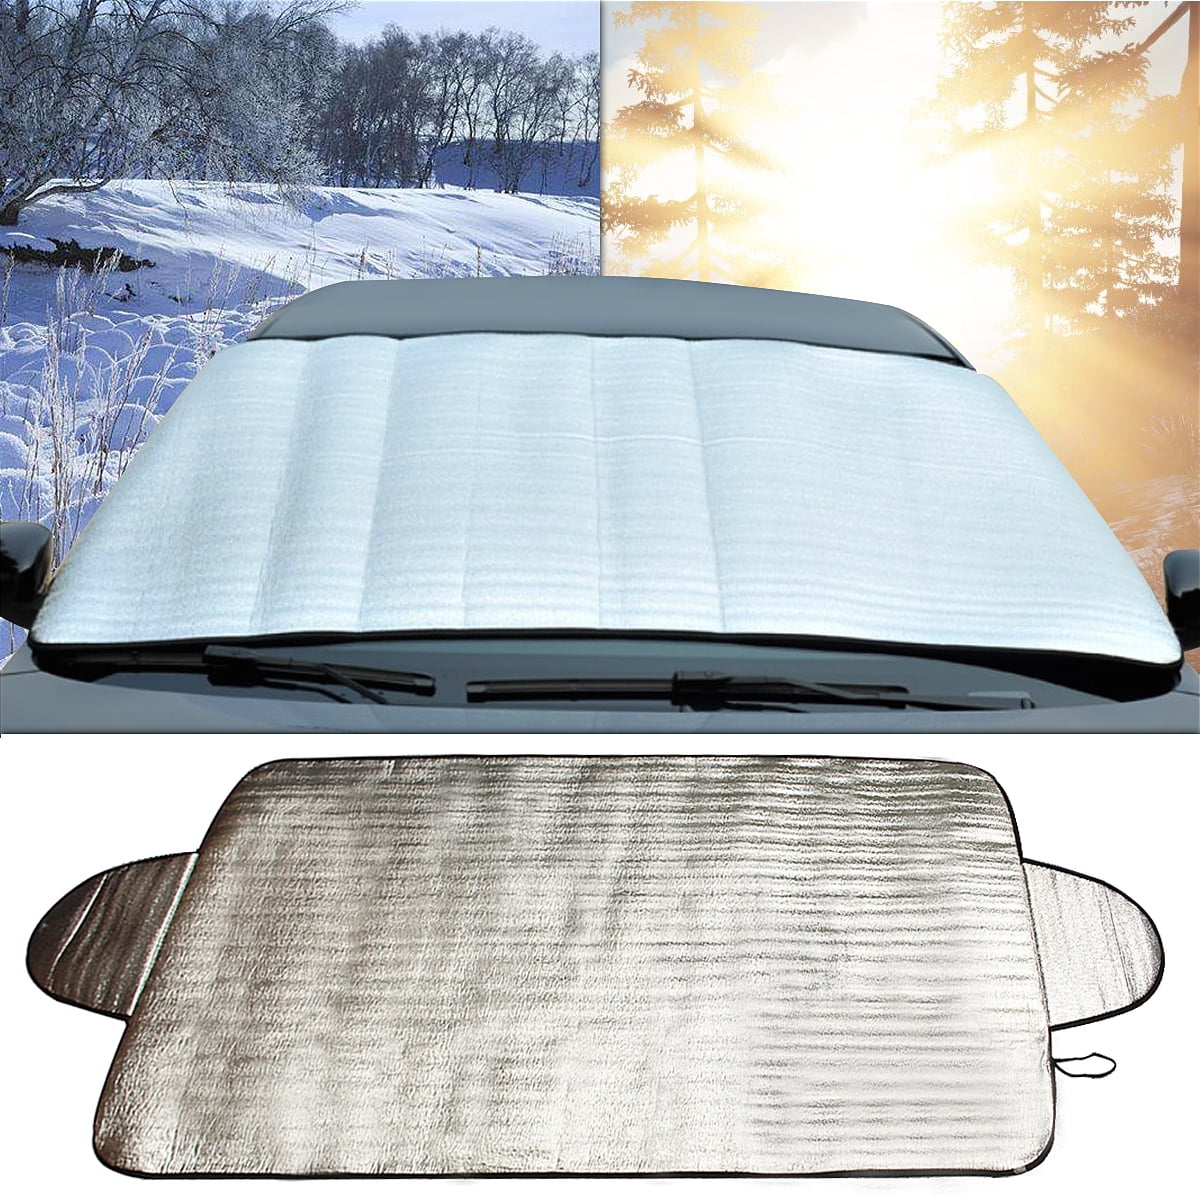 Fineway 3pc Reversible Frost Aluminium Car Sun Shade UV Frost Windscreen Cover Protector Front Window Sun Visor Keep Your Vehicle Cool Dust Cover Snow Ice Cover Windshields W 2 Side Mirror Covers 